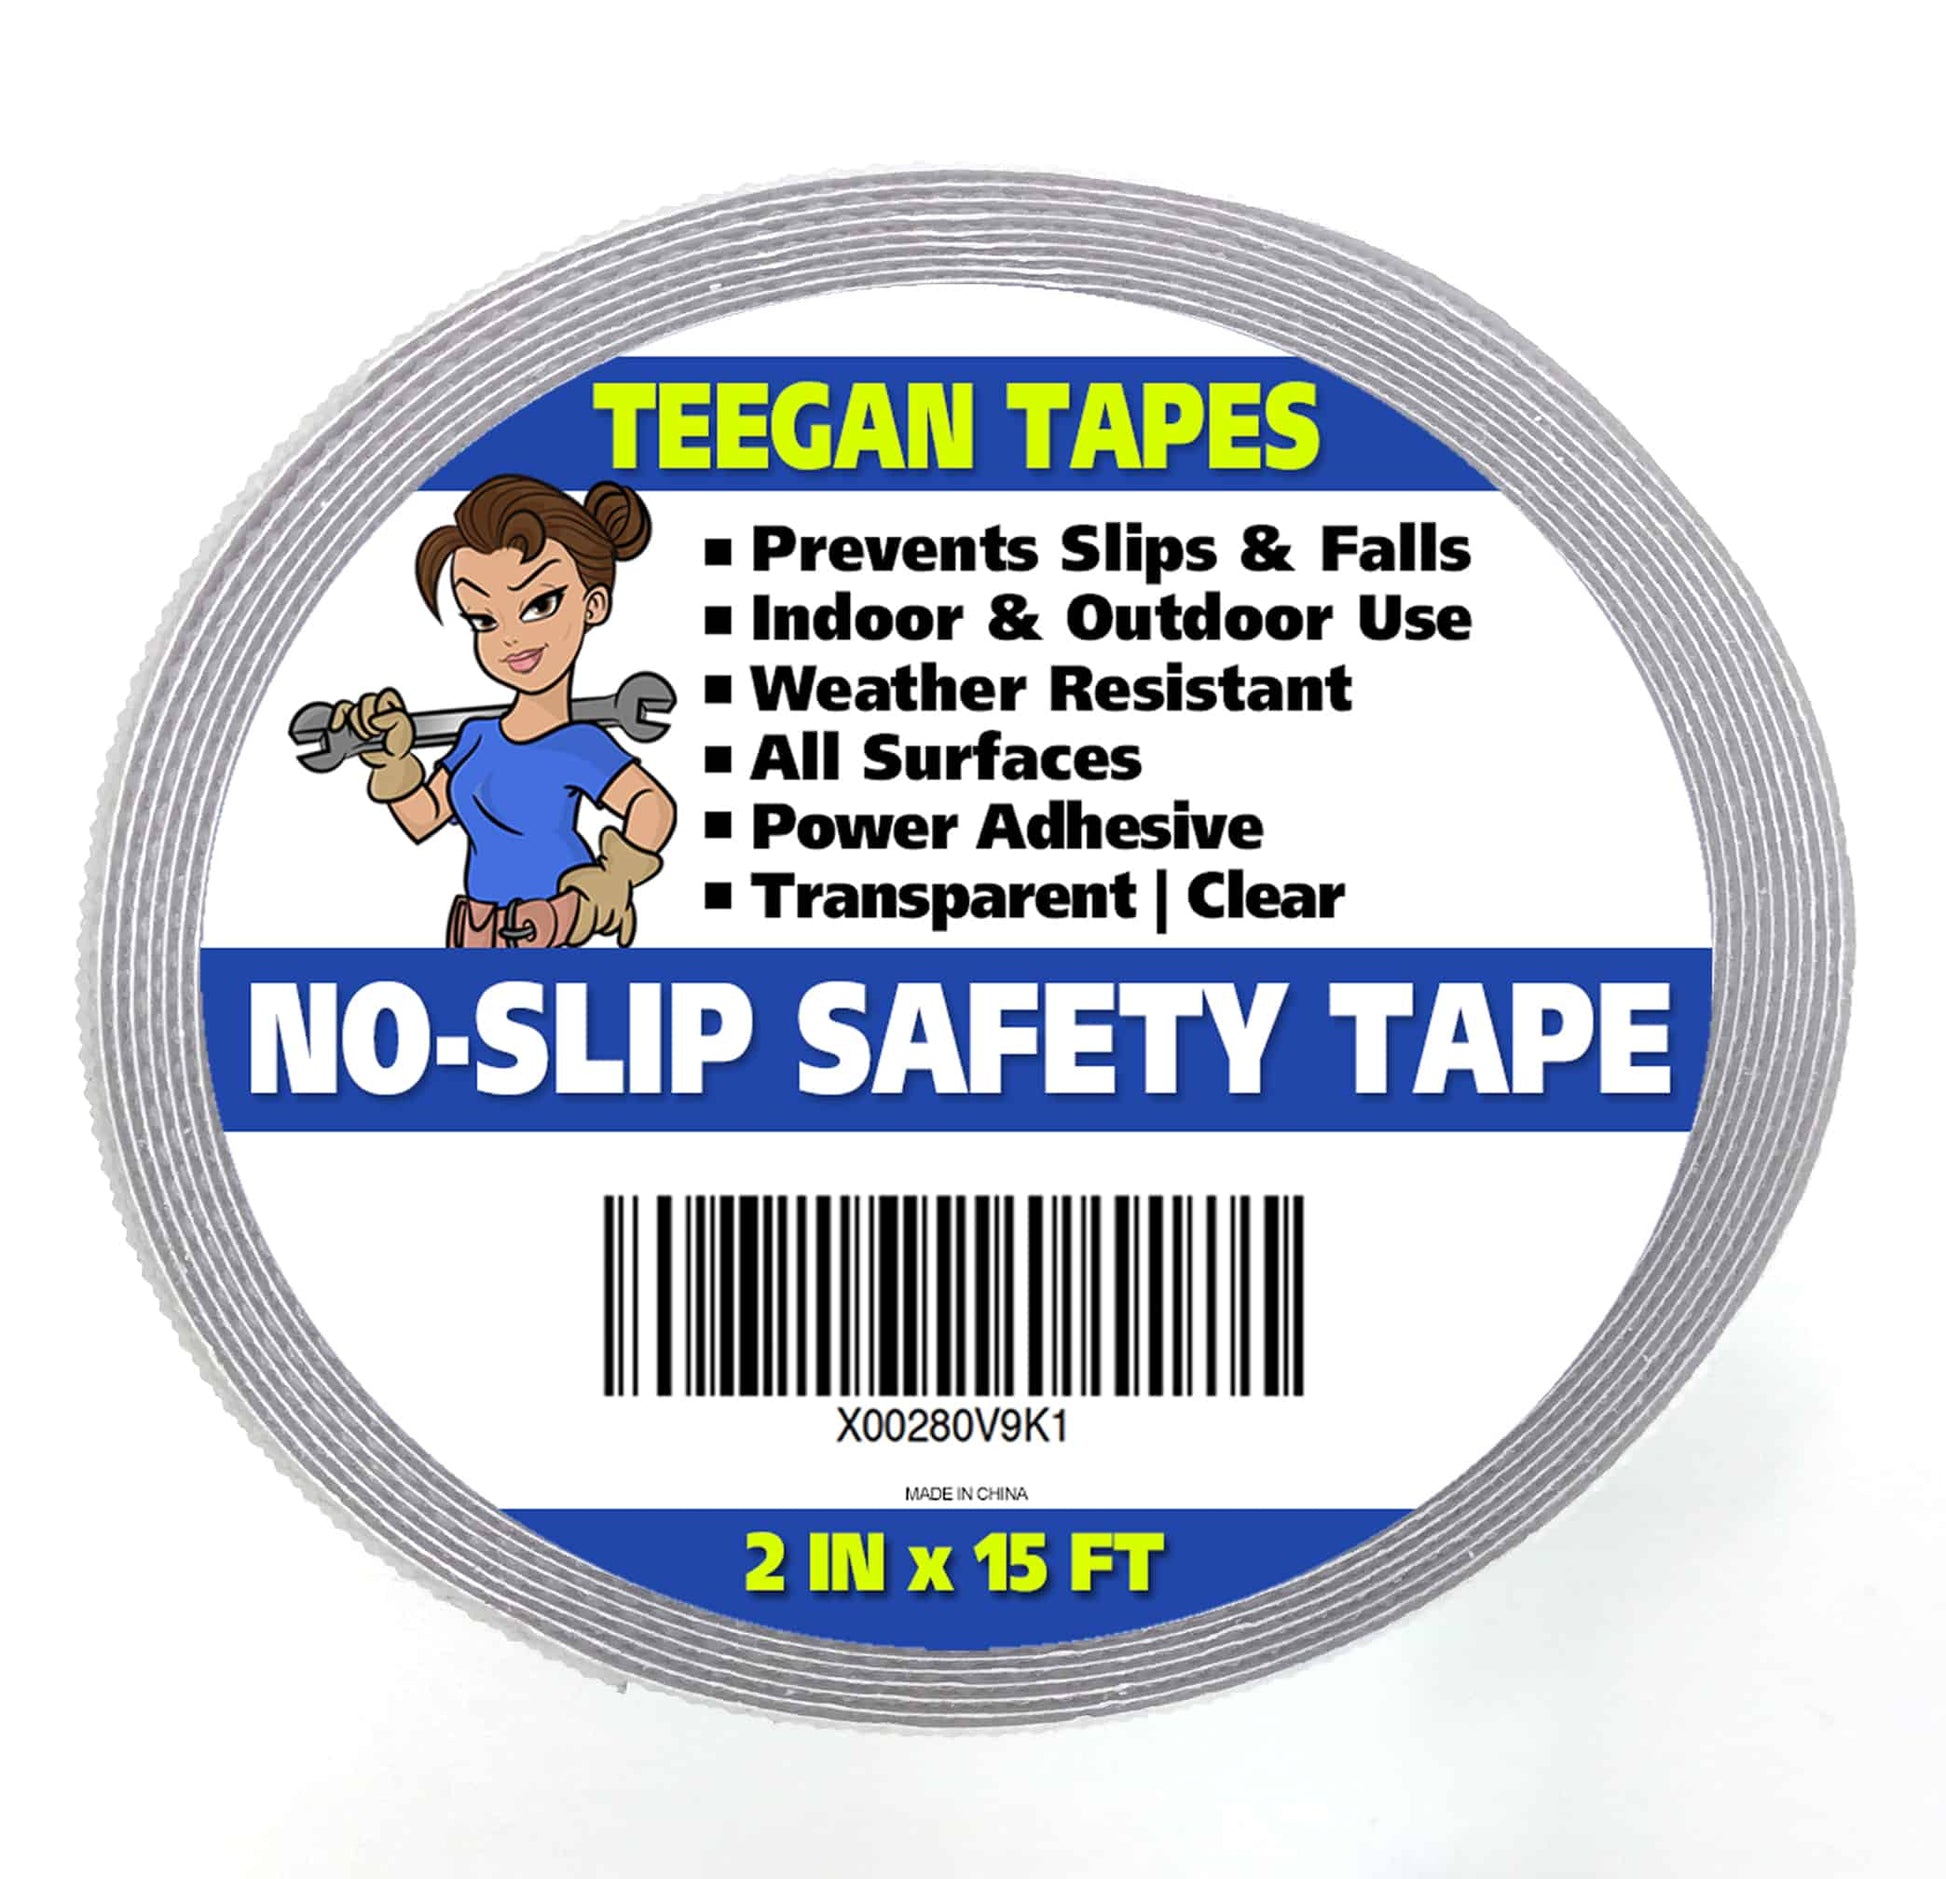 Double Sided Carpet Tape Water Resistant Carpet Tape For Area Rugs Anti  Skid Mesh Glue For